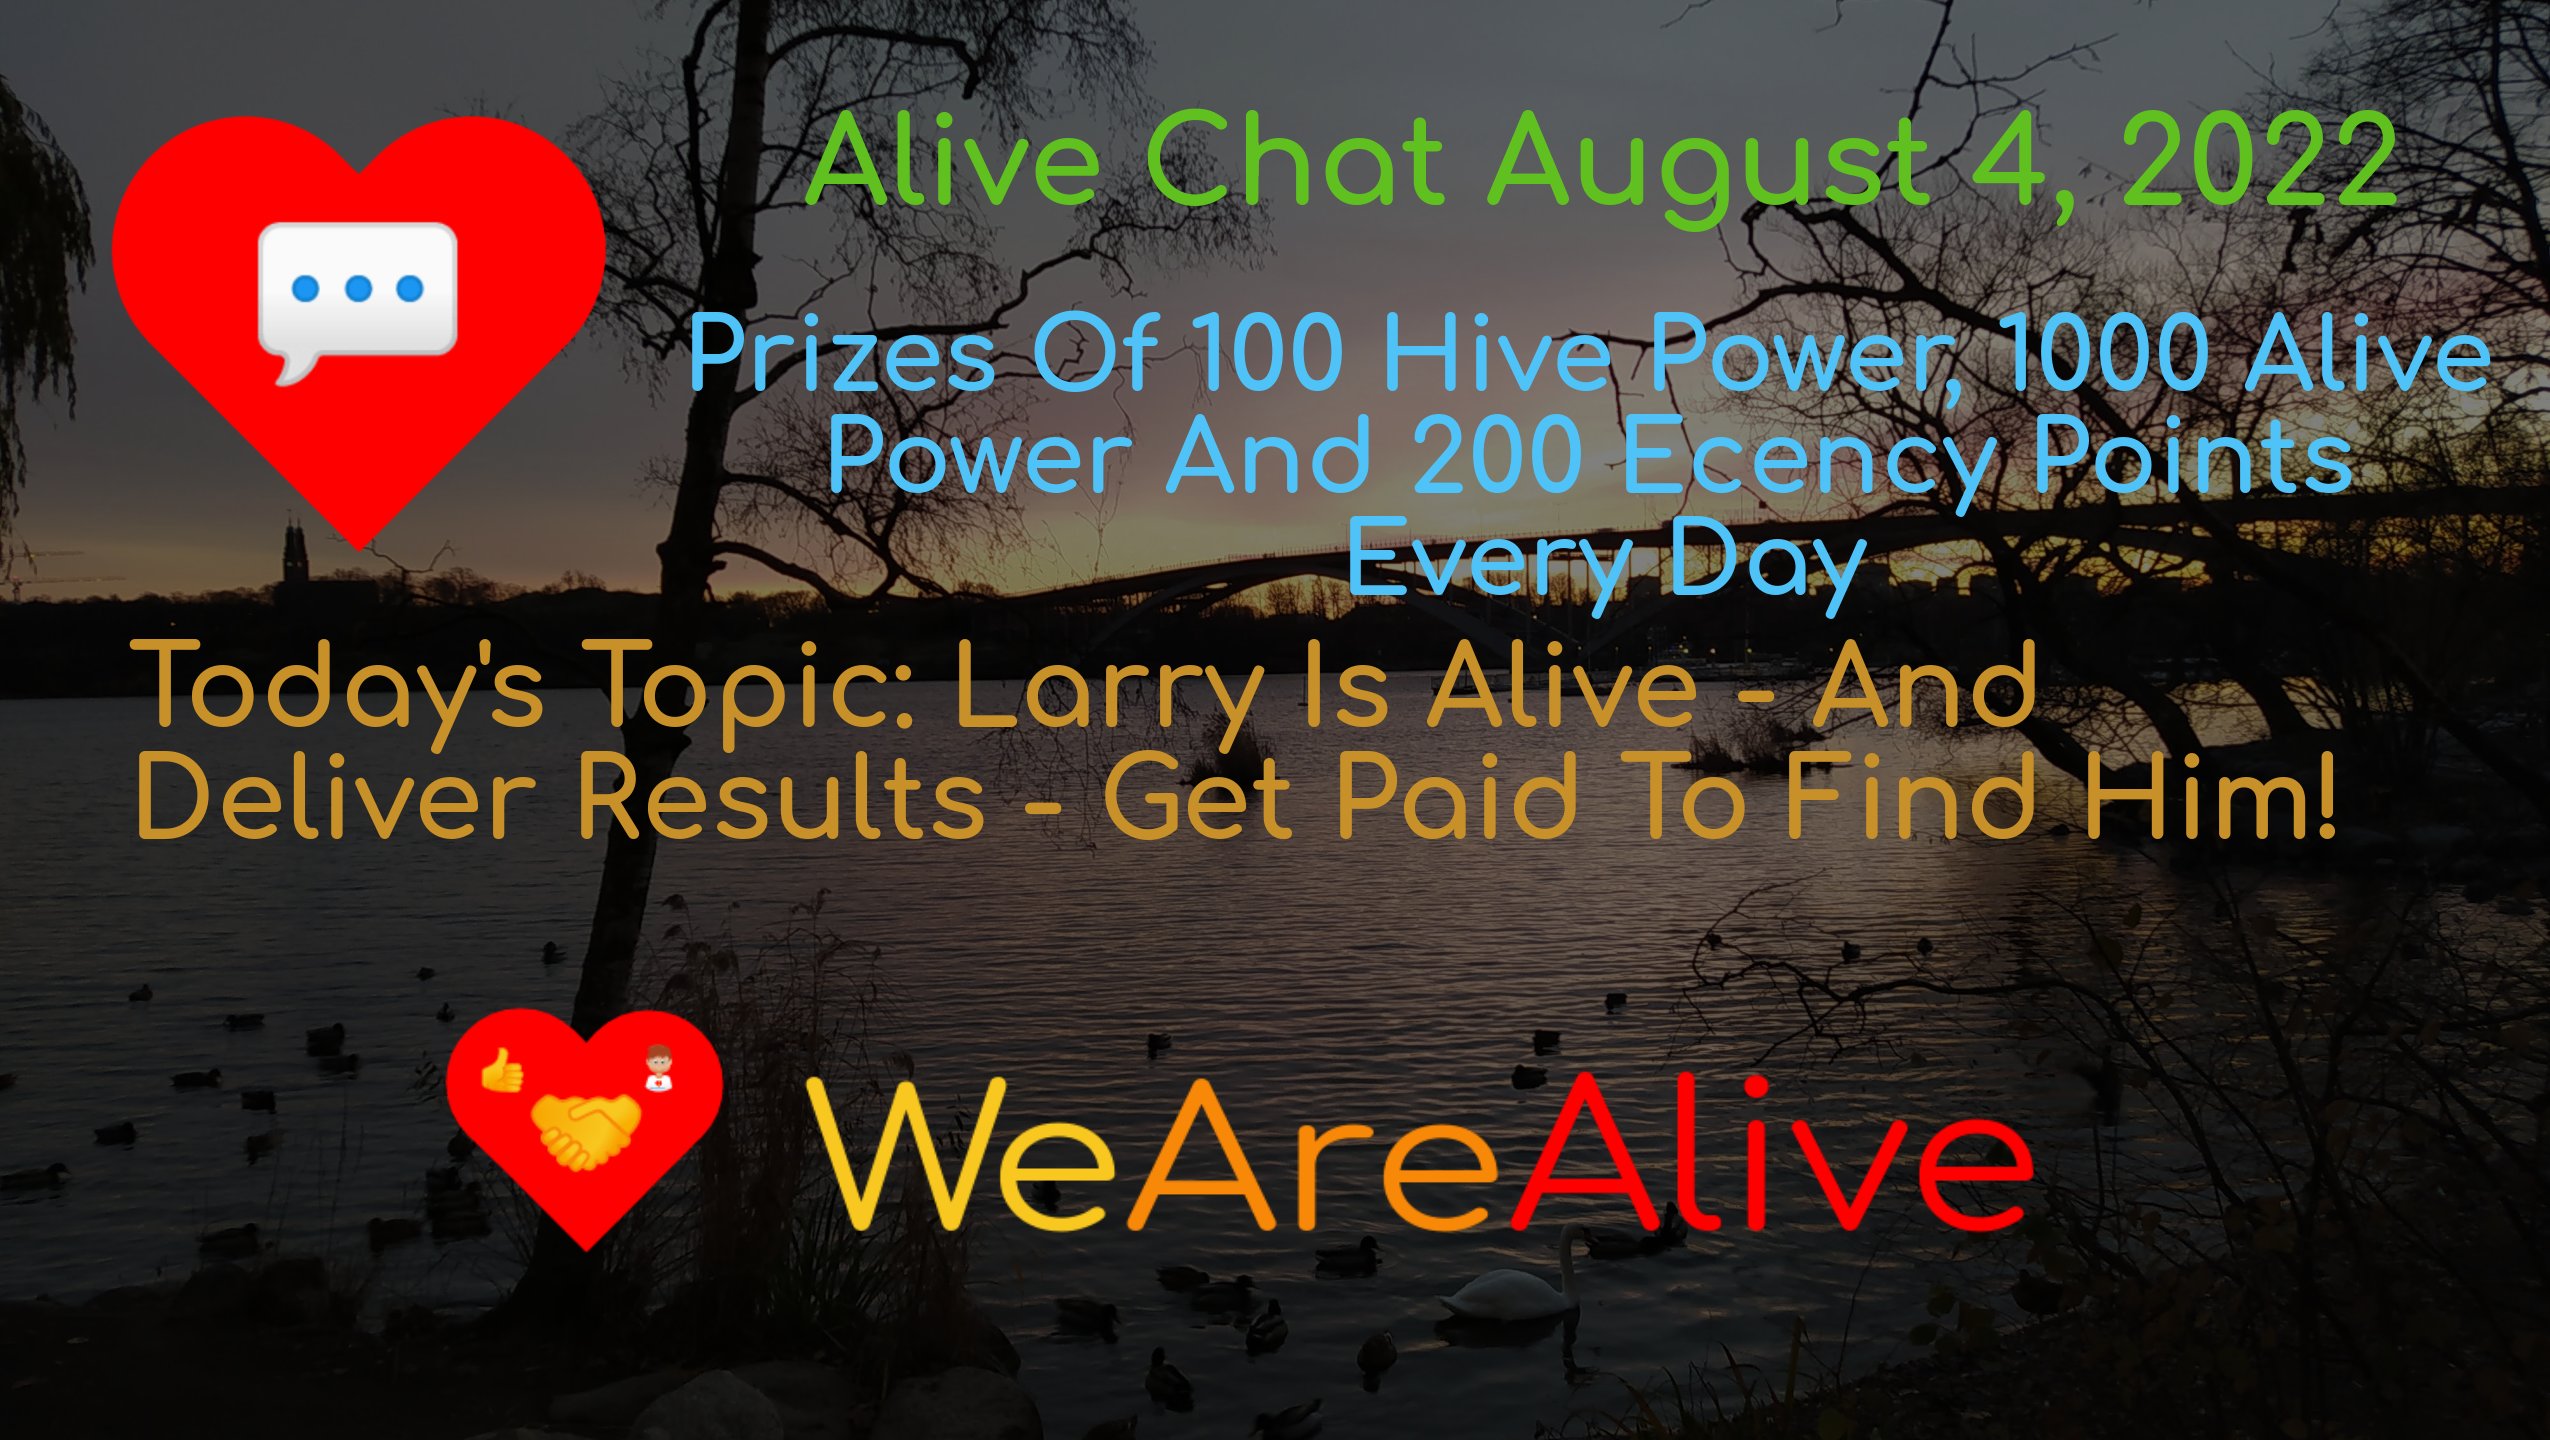 @alive.chat/alive-chat-august-4-2022-daily-prize-drawing-open-for-entries-todays-topic-larry-is-alive-and-deliver-results-get-paid-to-find